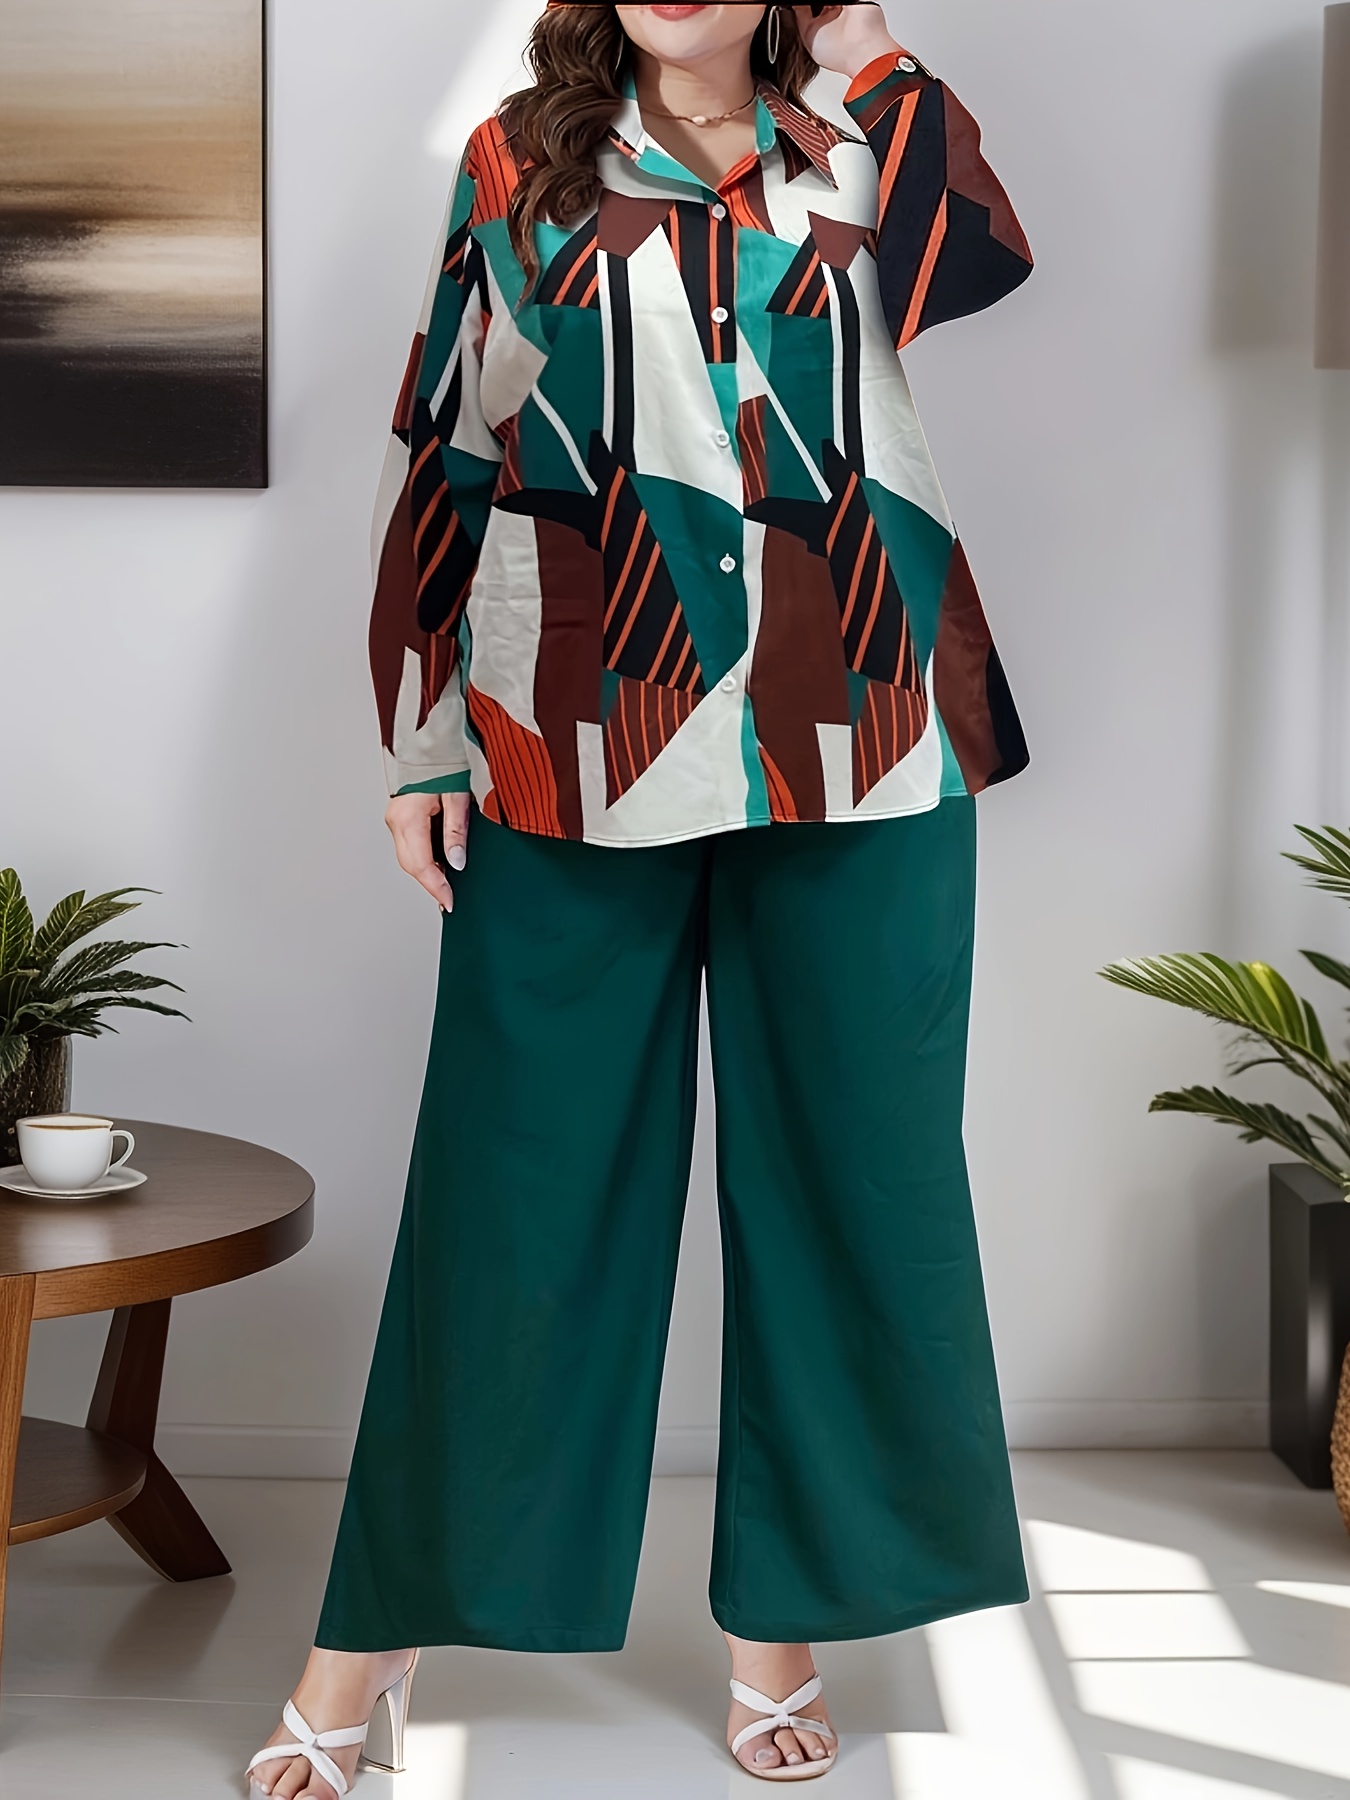 Plus Size Women's Solid Neon Green Long Sleeve Chic One Button Blouse and  Pants Two Piece Set - The Little Connection